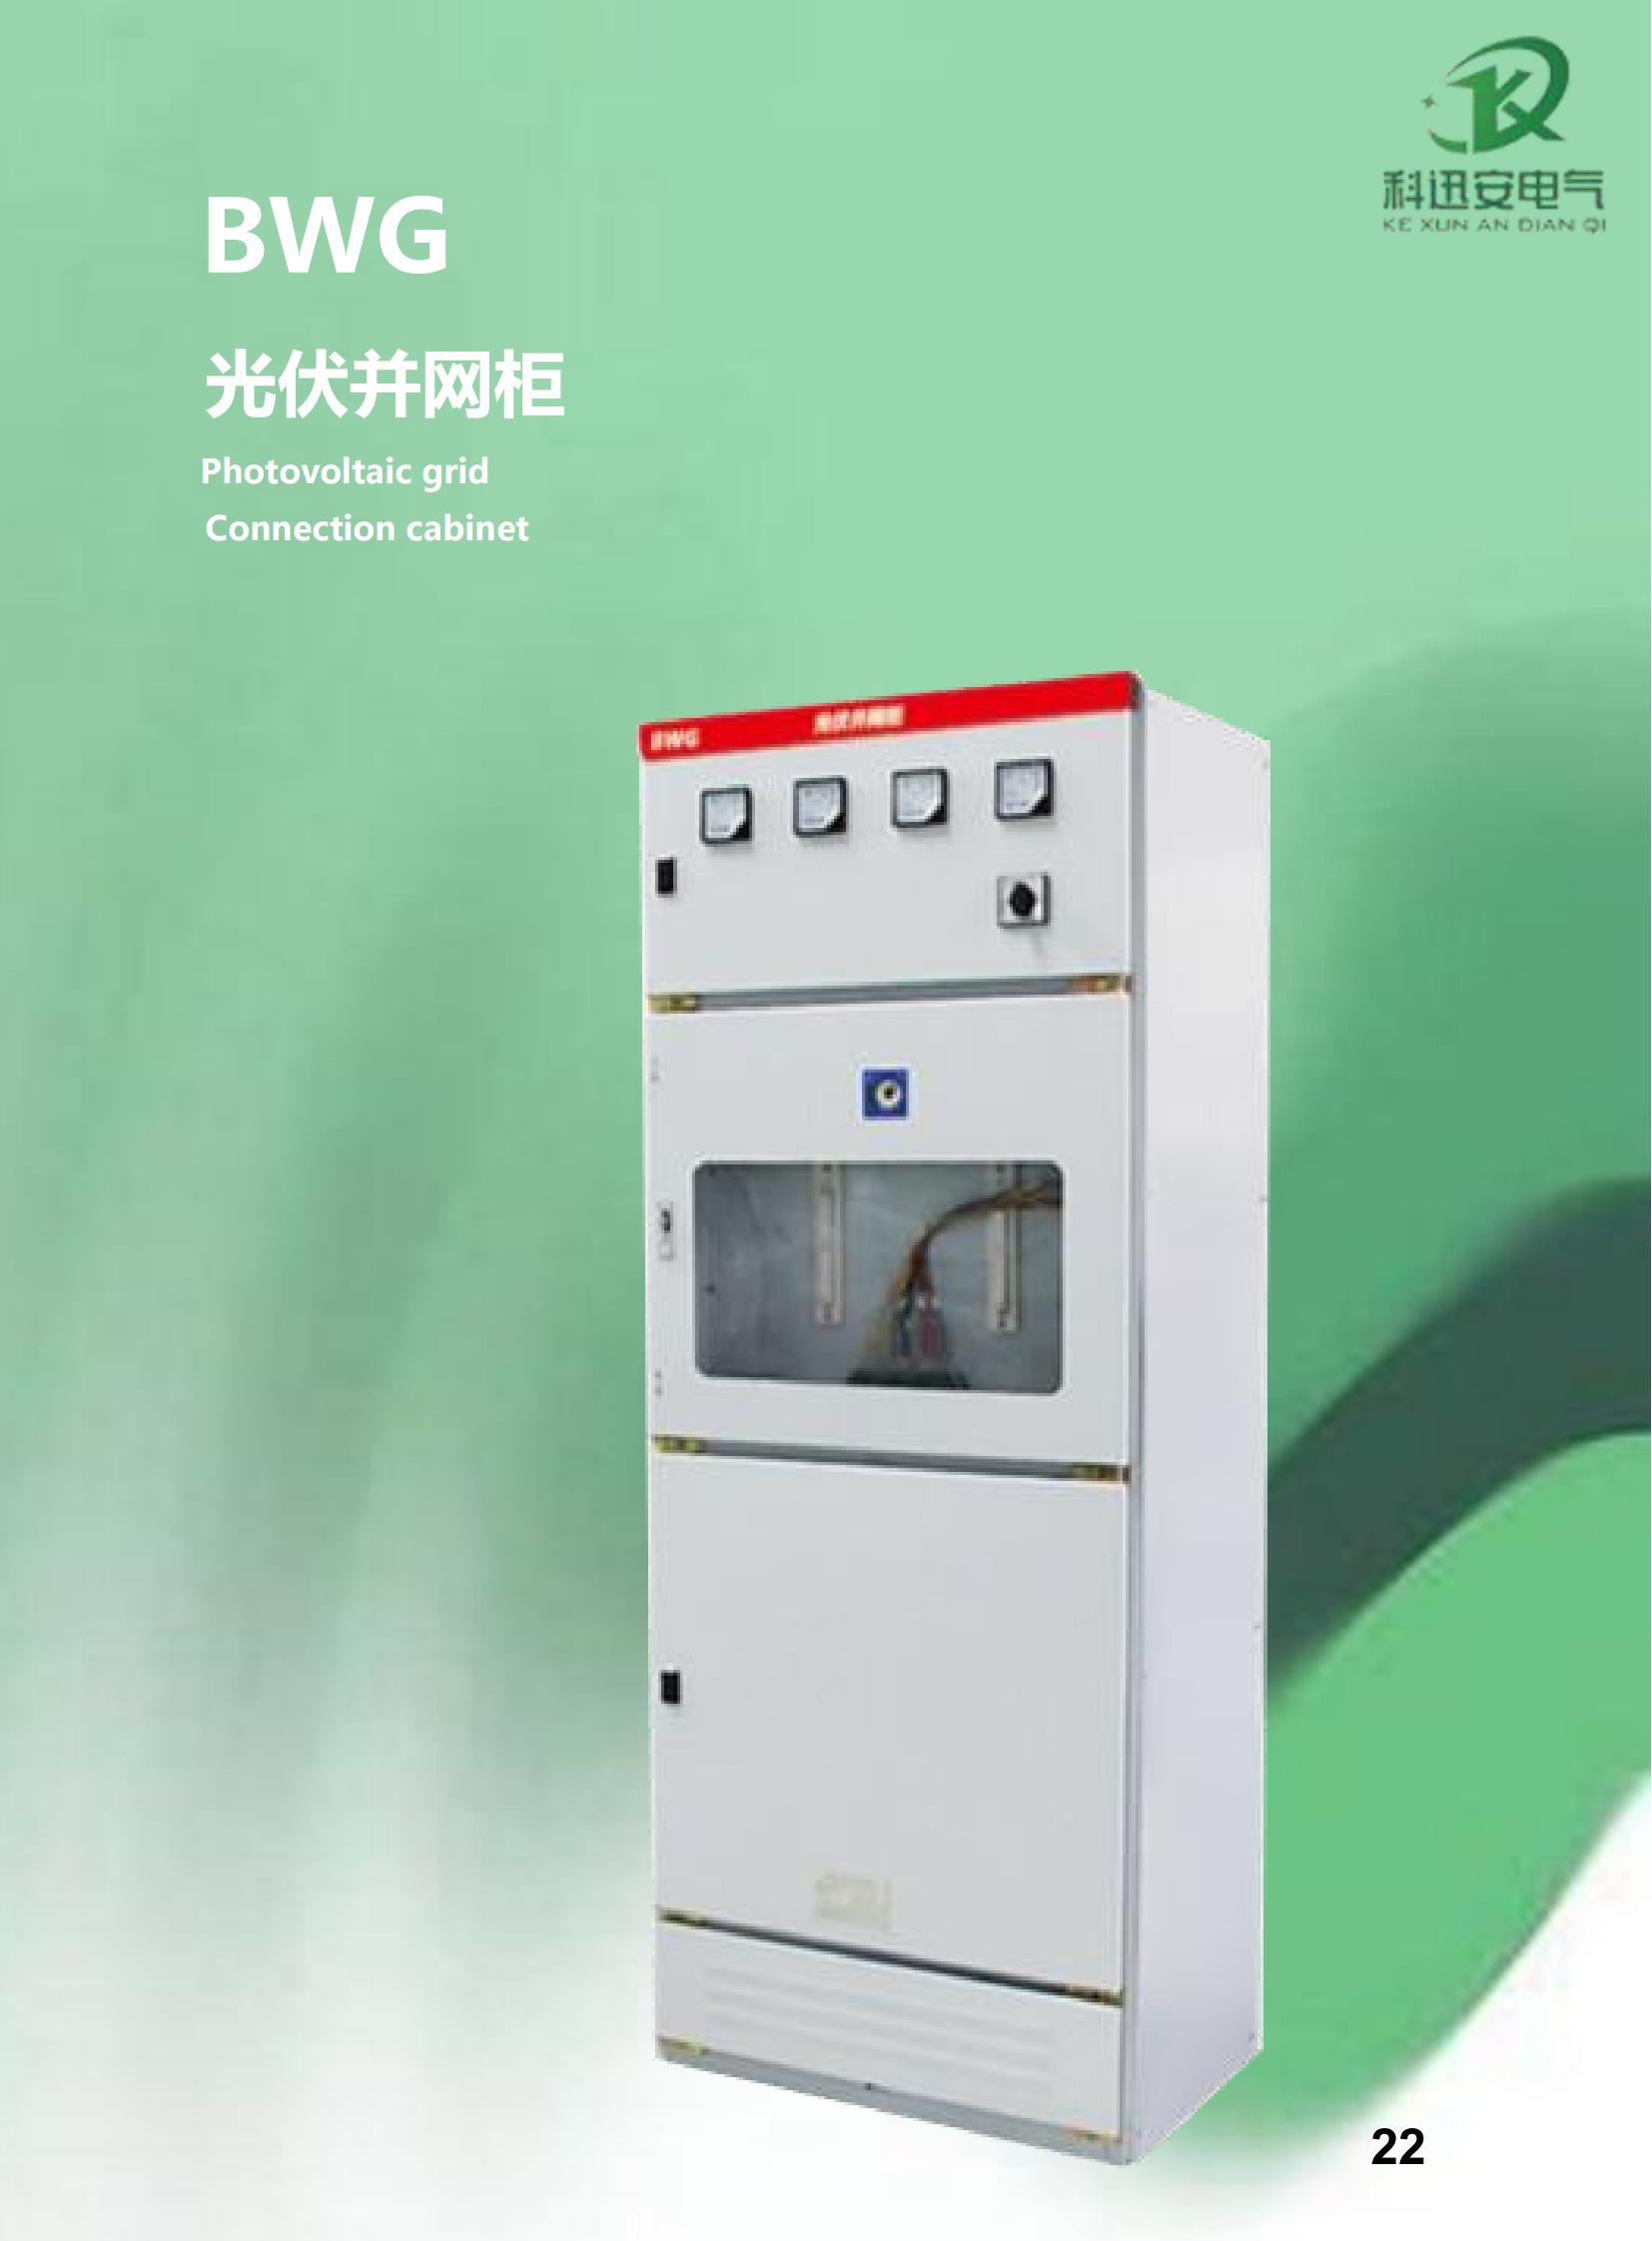 BWG photovoltaic grid connected cabinet